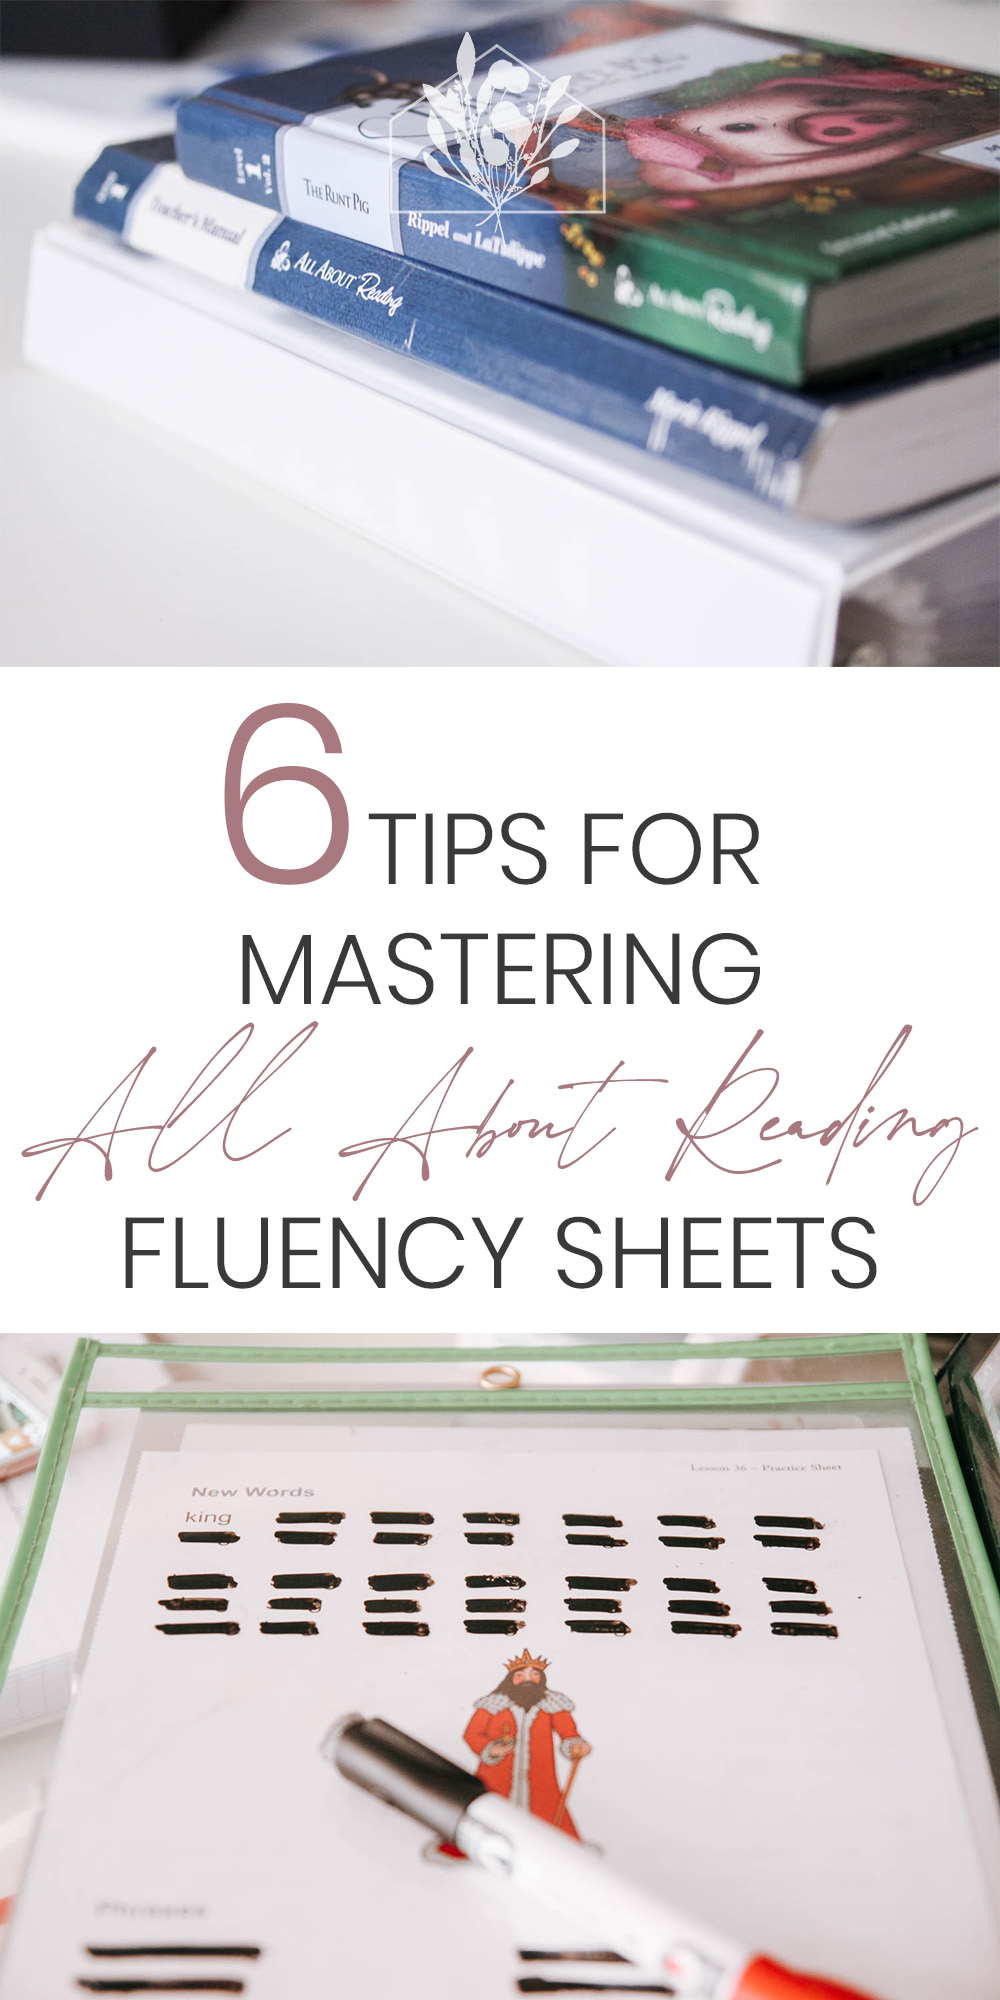 Mastering All About Reading Fluency Sheets